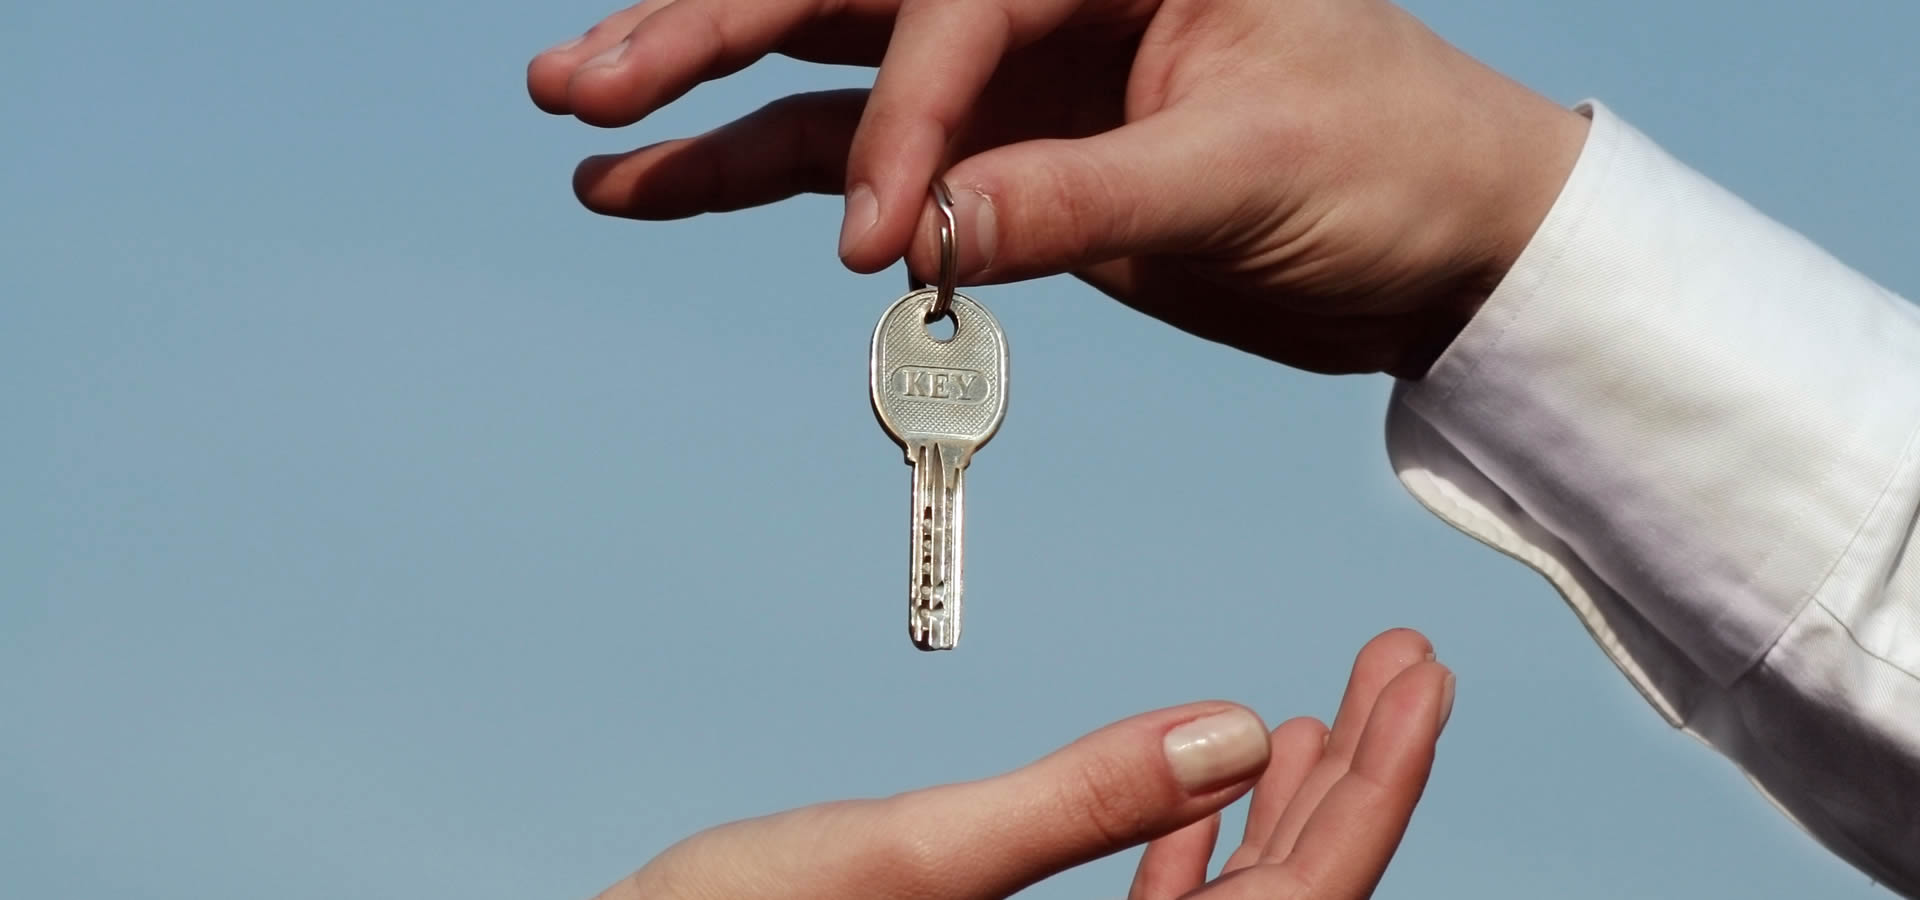 Man's hand passing two keys to woman's hand